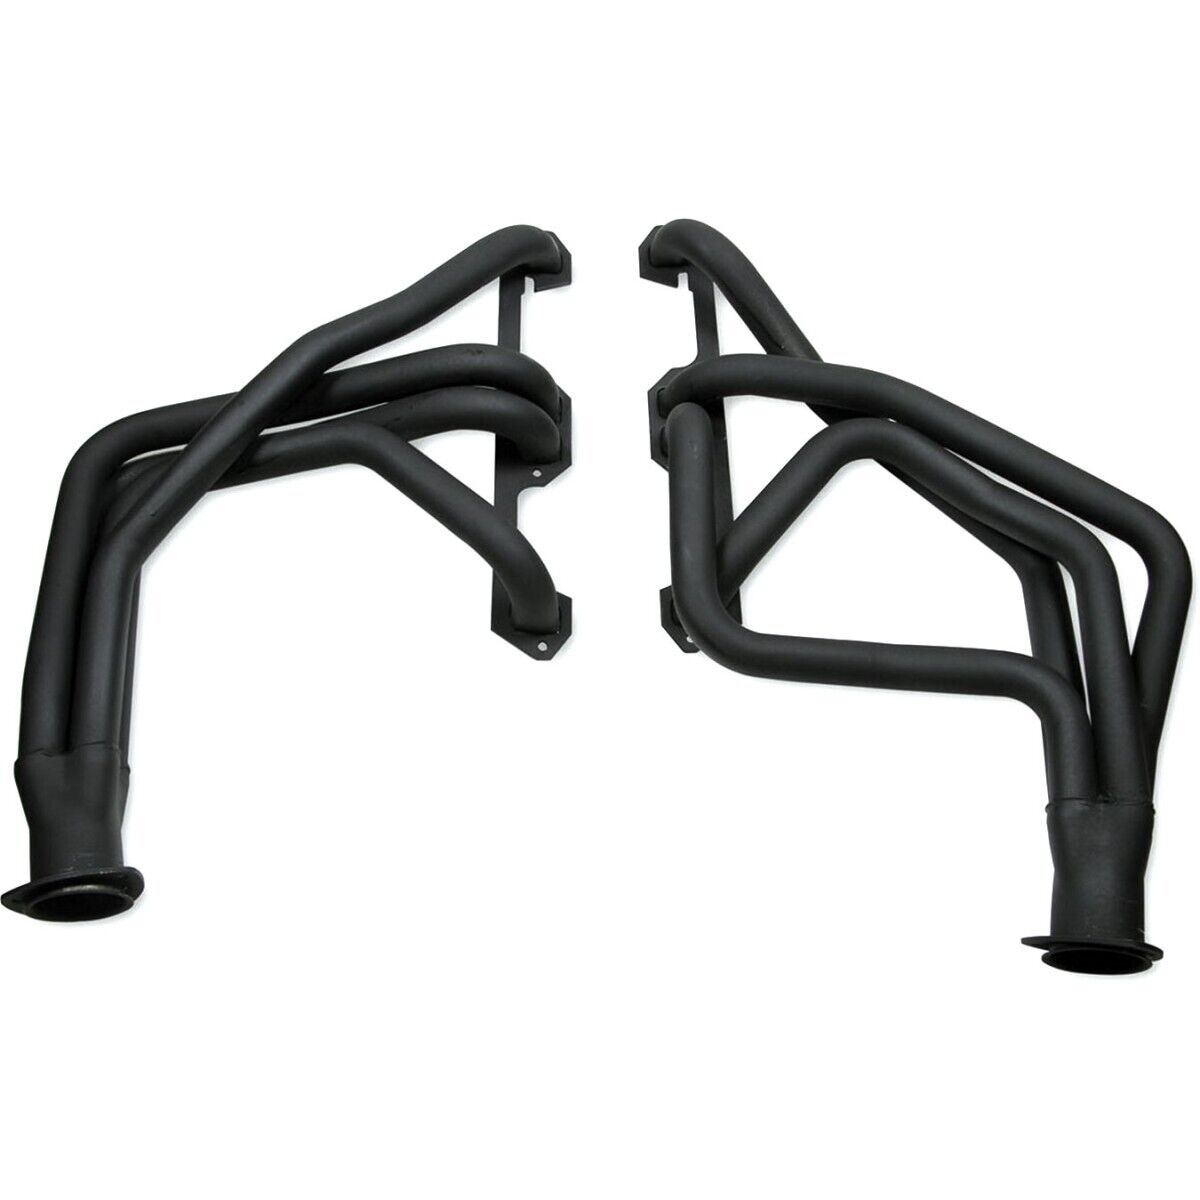 13130FLT Flowtech Set of 2 Headers New for Dodge Charger Challenger Coronet Pair